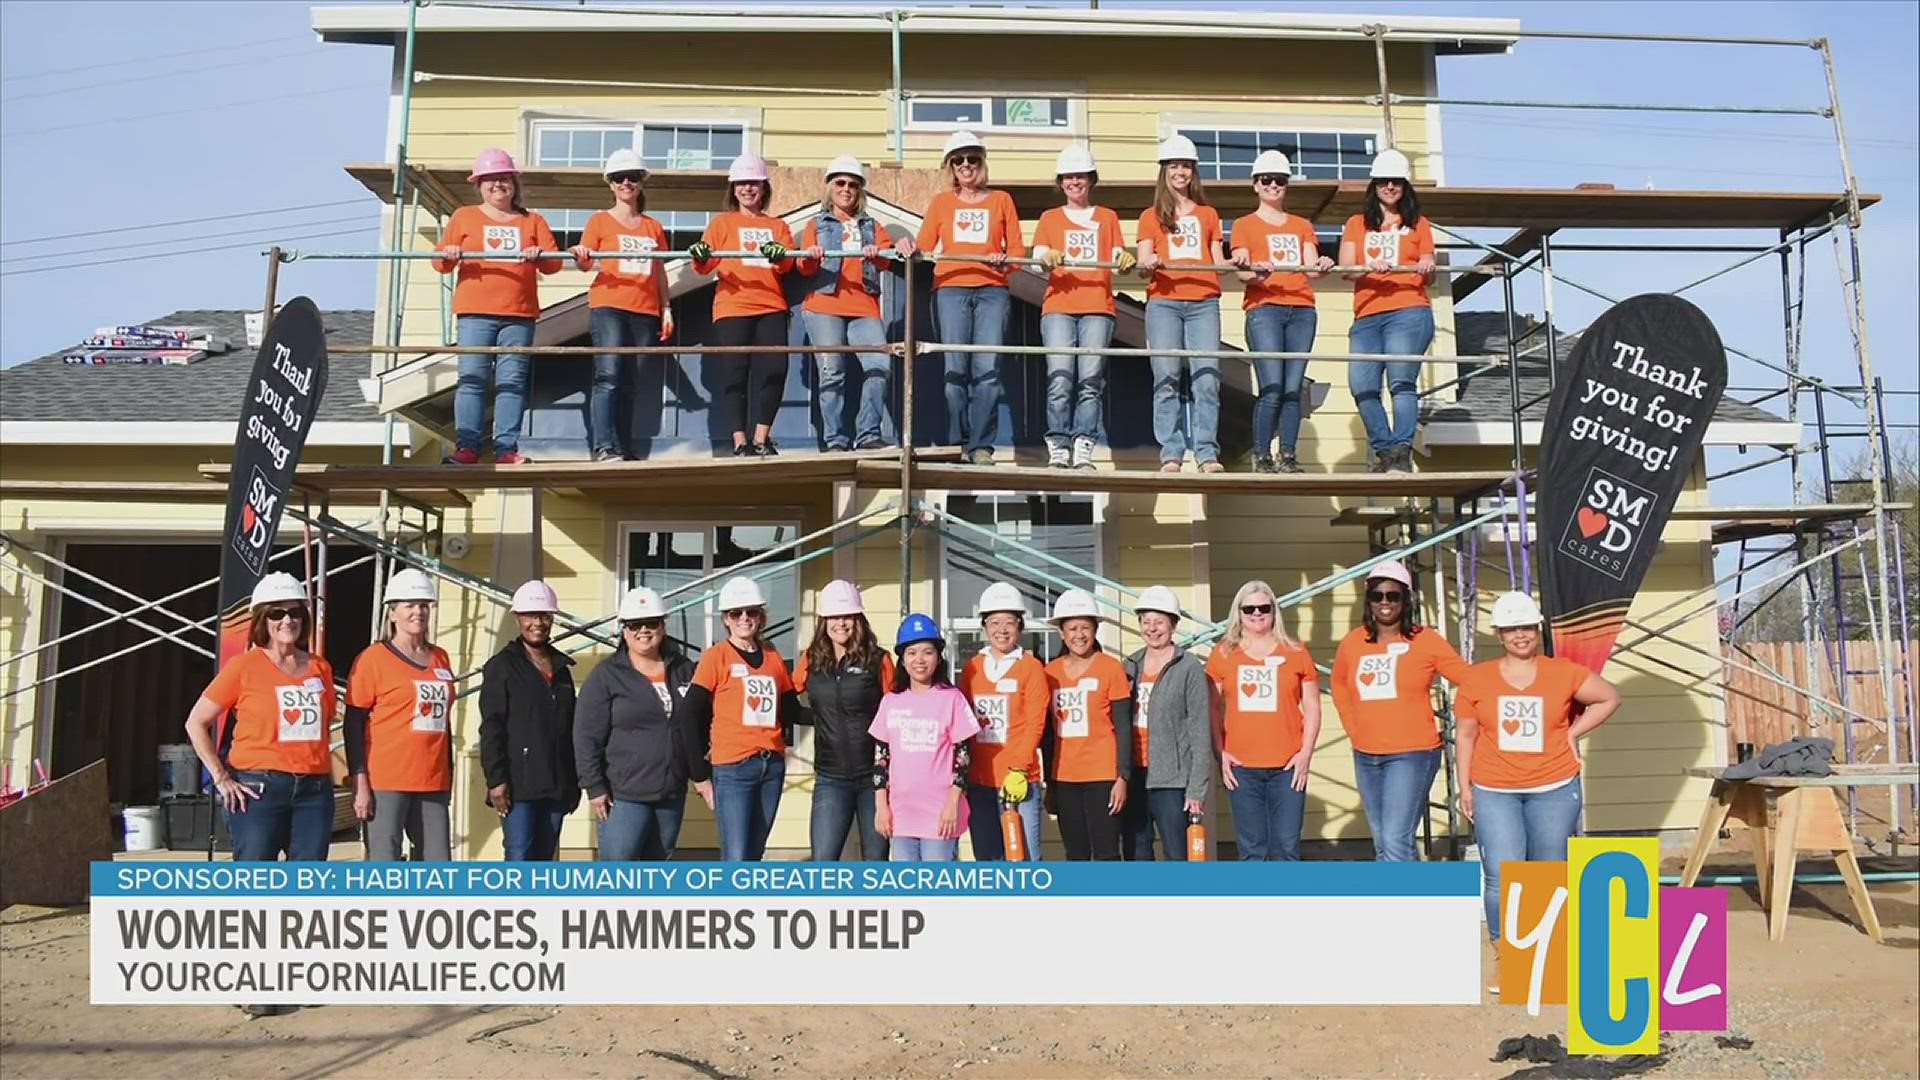 Women Build brings together our community to make a difference with Habitat for Humanity of Greater Sacramento by building greatly needed affordable housing in Sac!